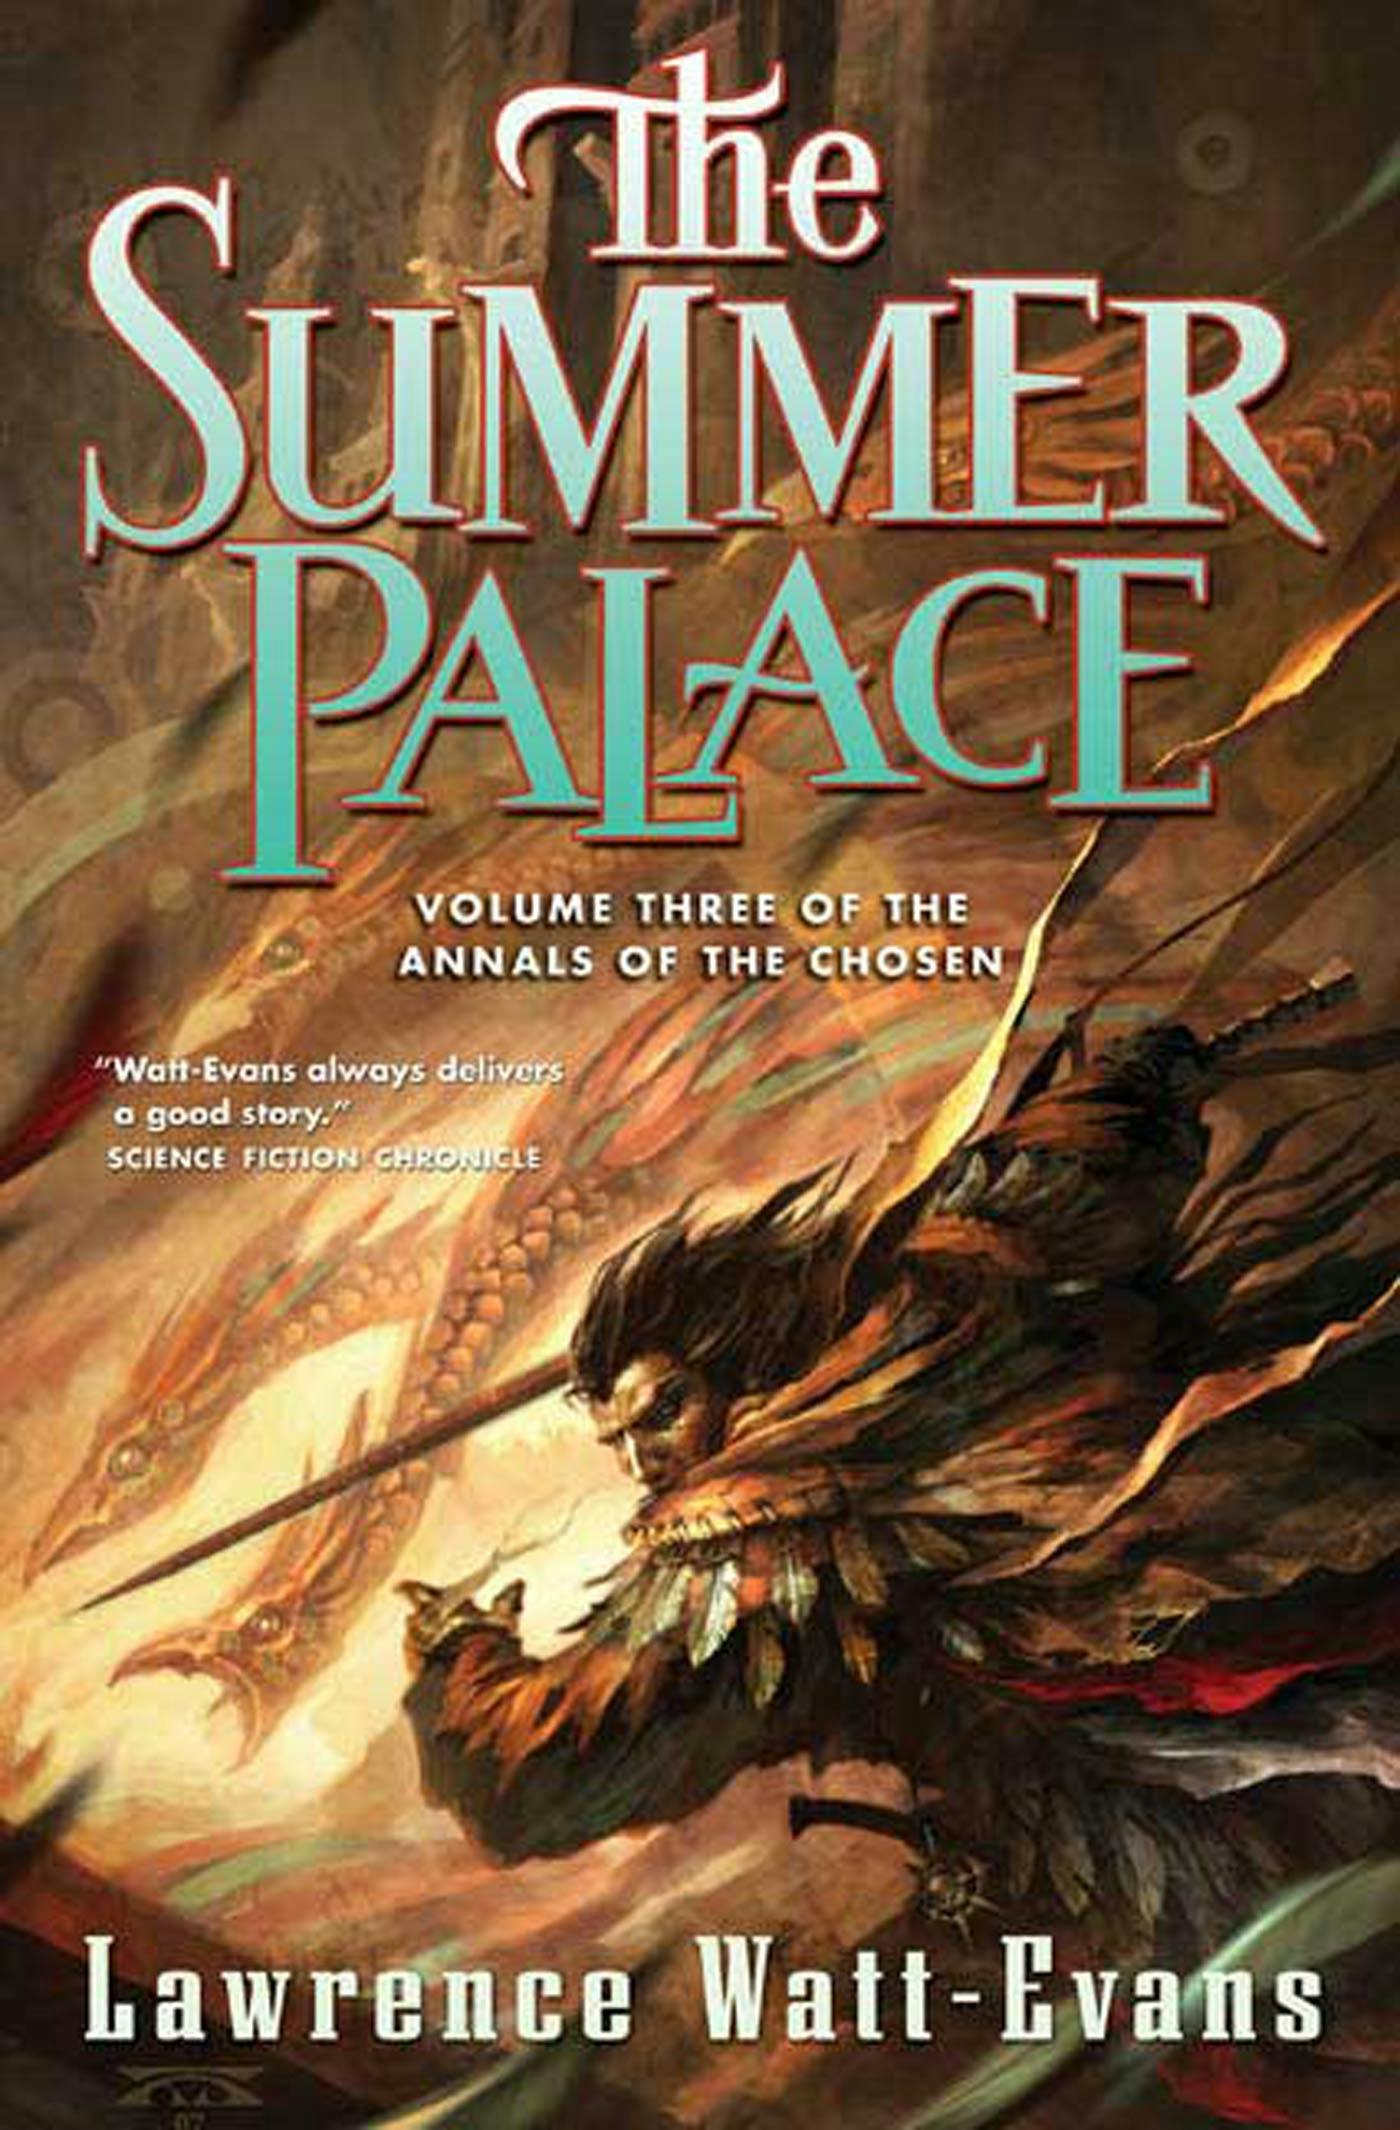 Cover for the book titled as: The Summer Palace